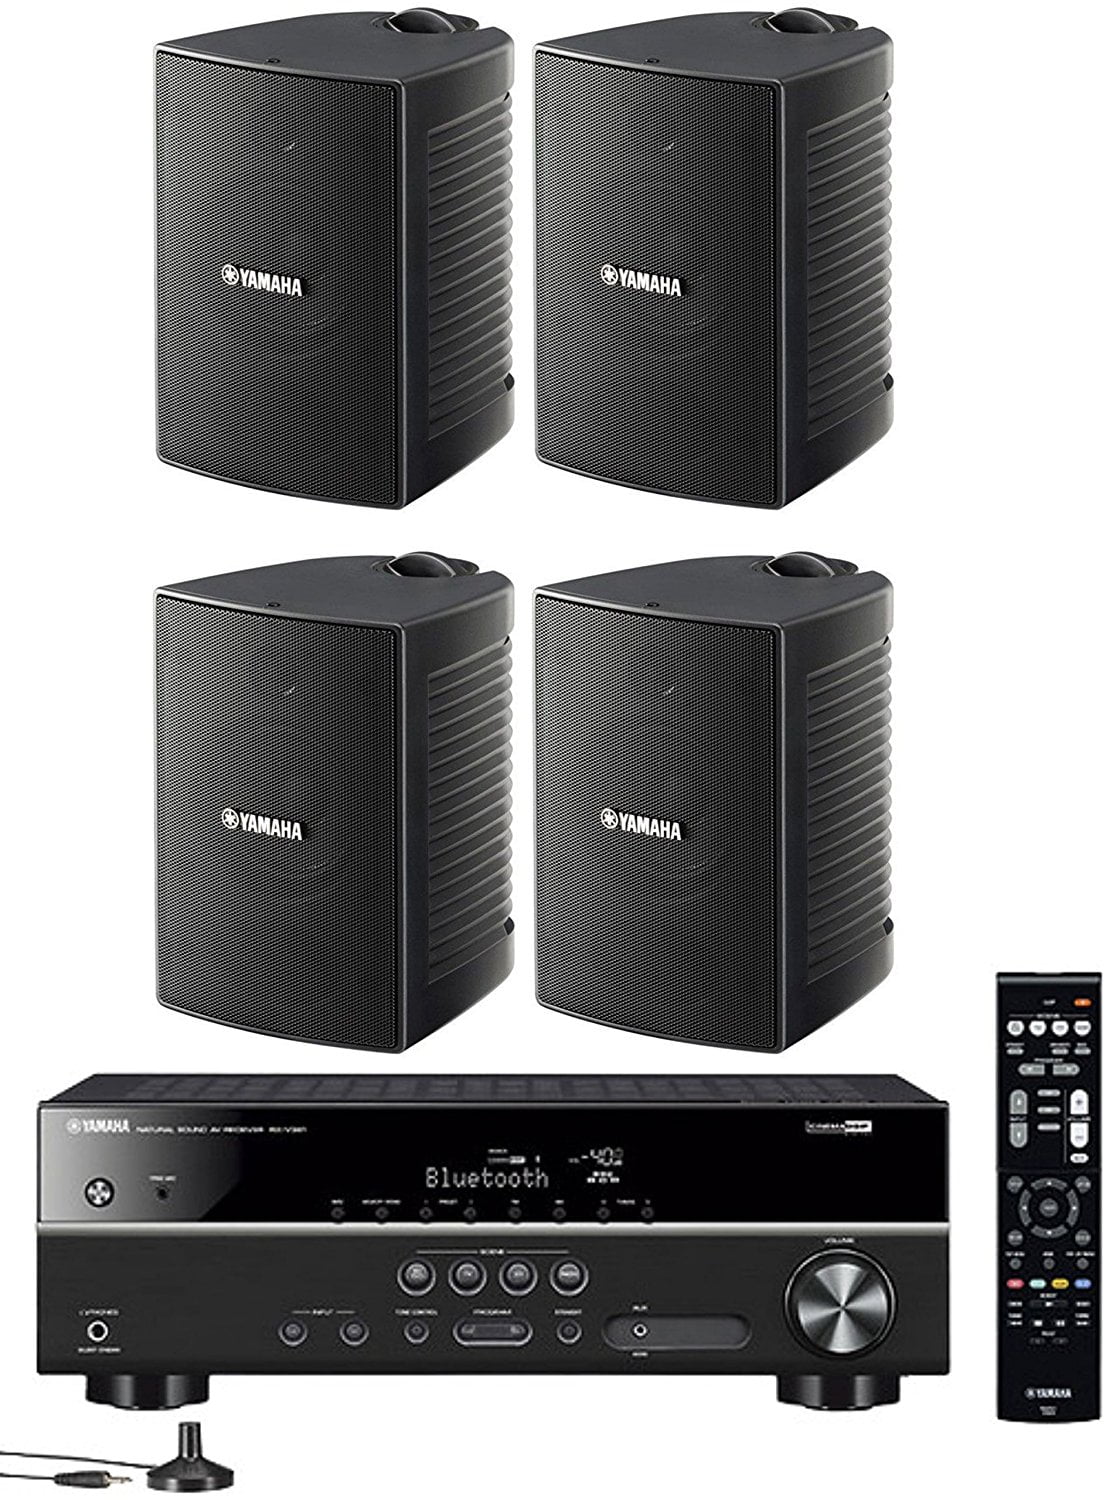 Yamaha 5.1-Channel Wireless Bluetooth 4K A/V Home Theater Receiver + Yamaha  Natural Sound High performance 2-Way Indoor/Outdoor Weatherproof Speakers 